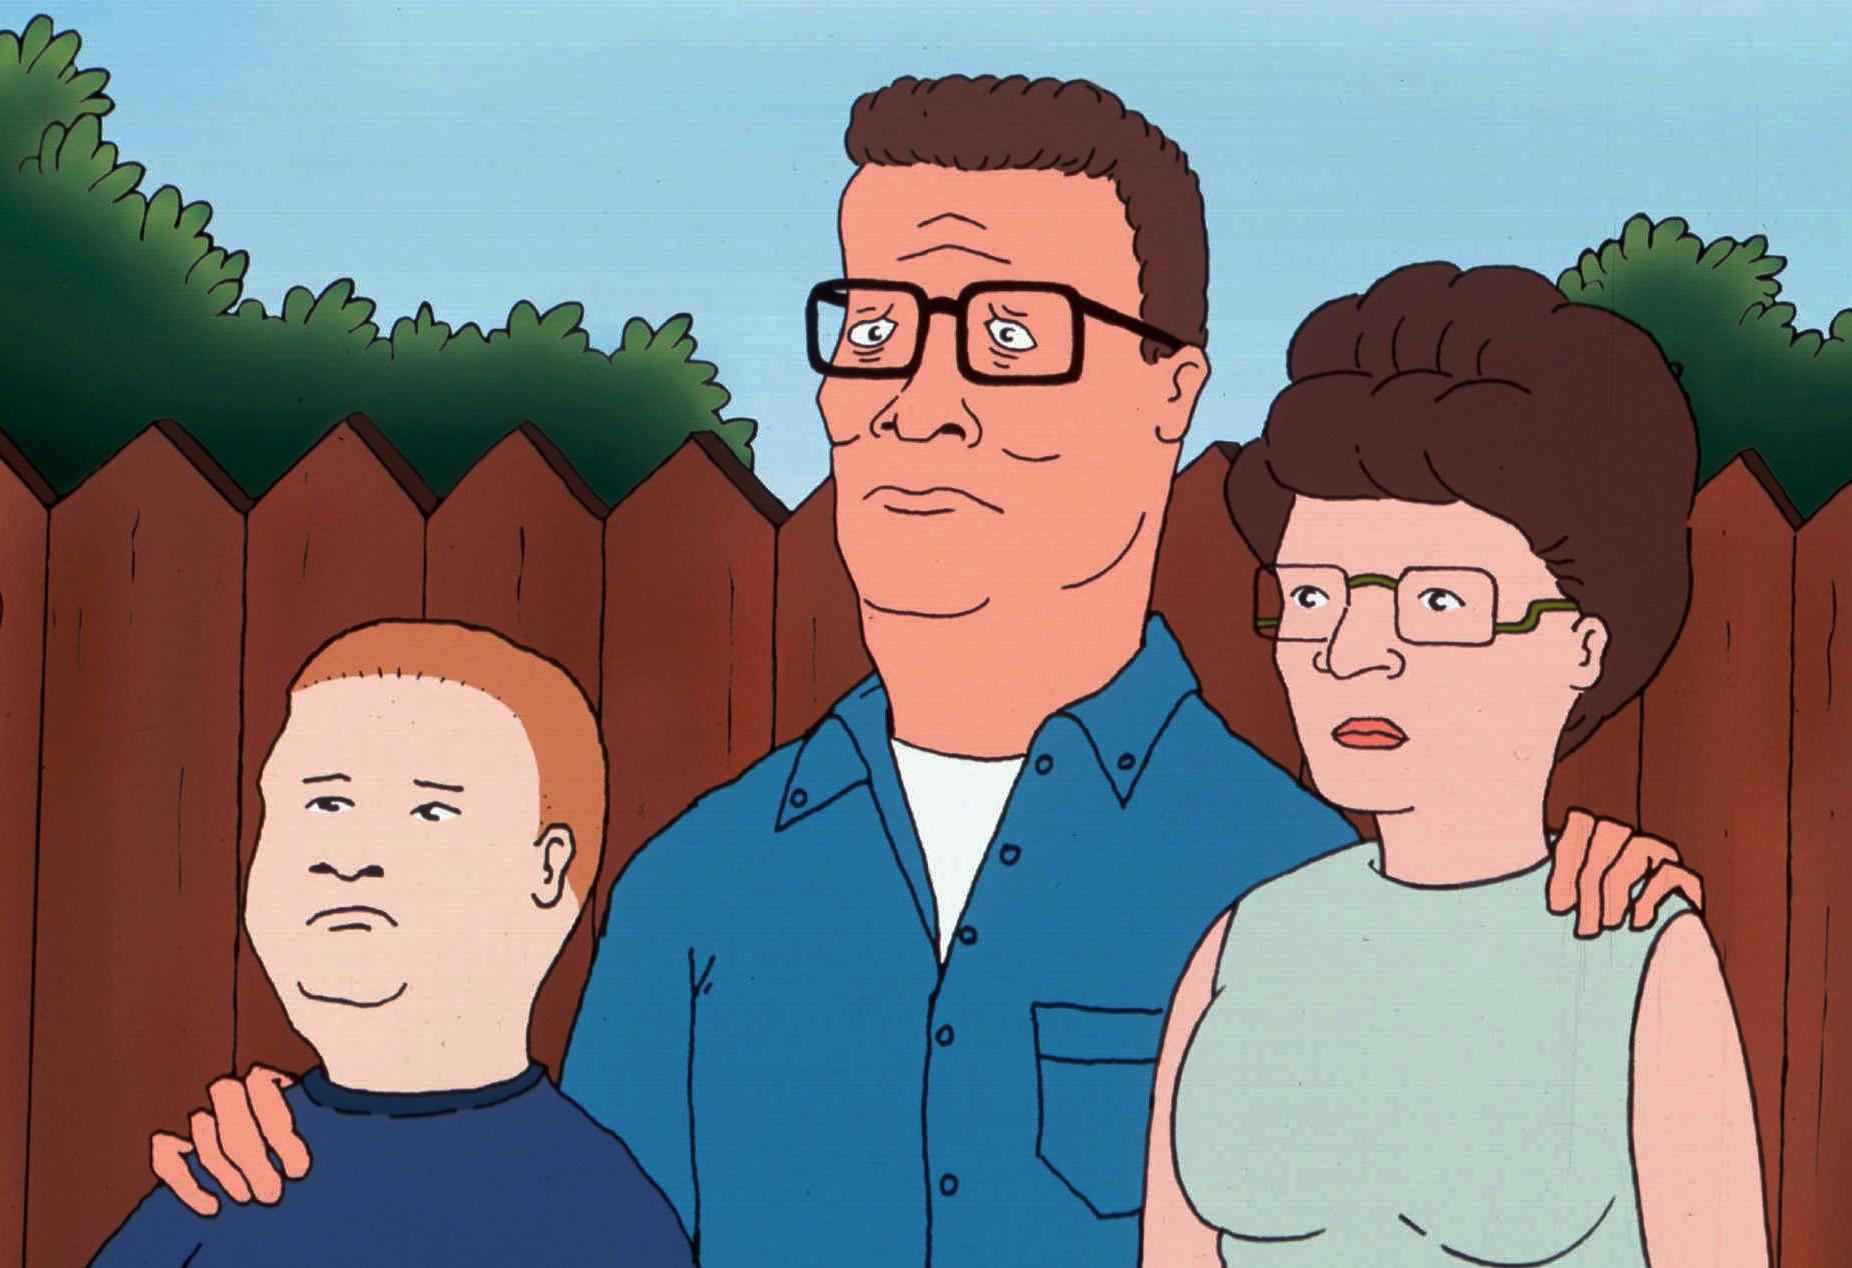 King of the Hill: Alone Again, Current